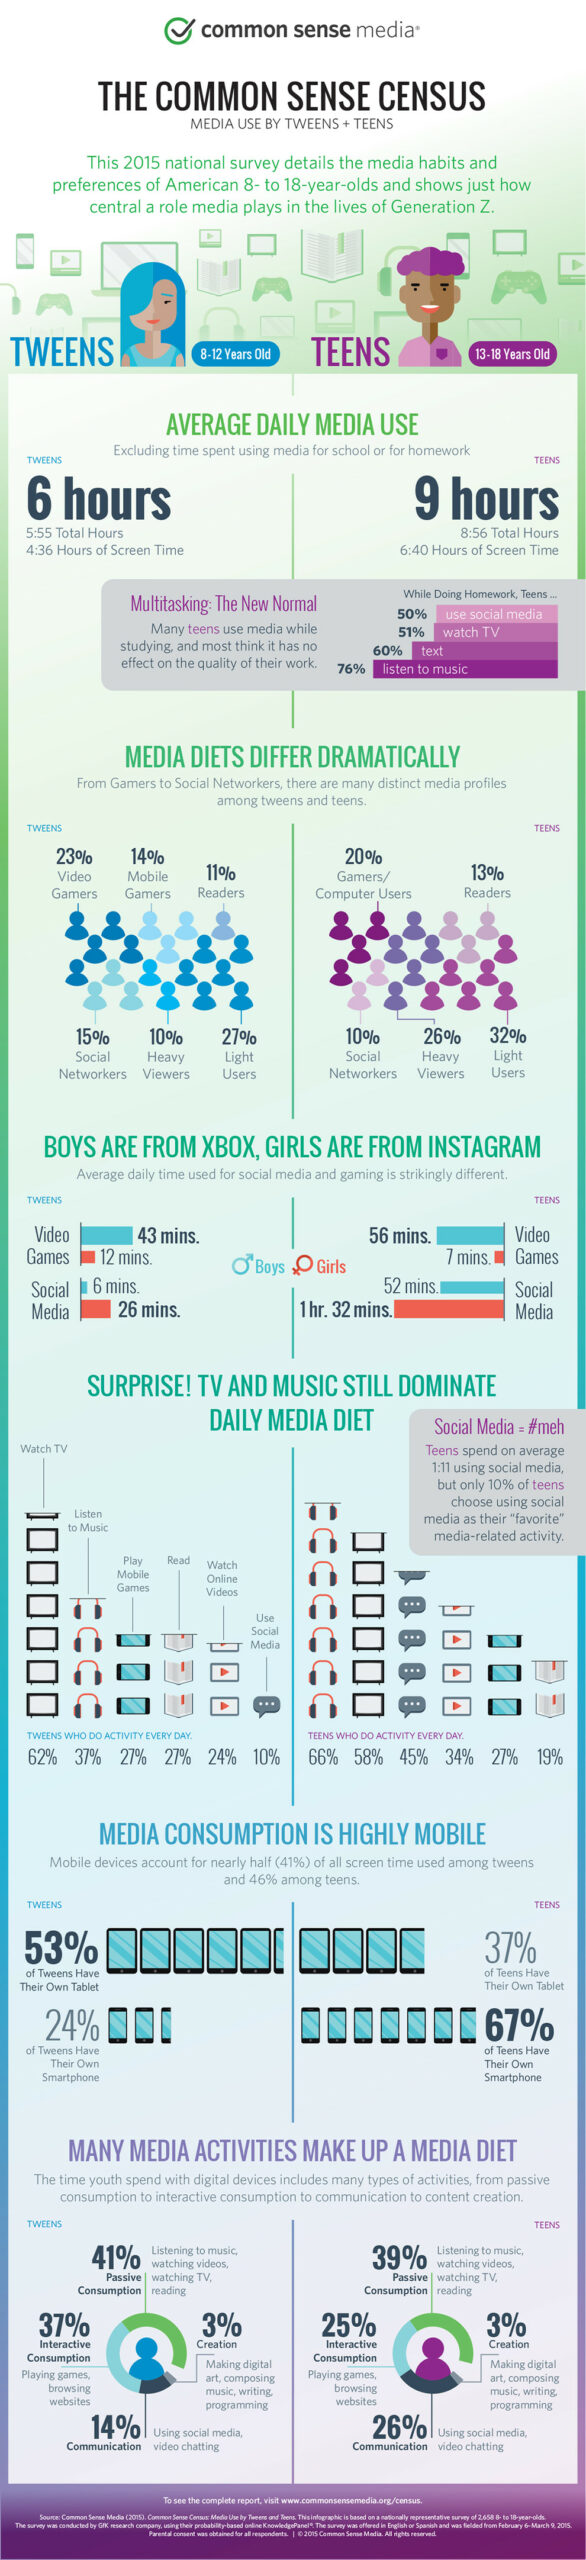 Teen and Tween Media Use - What you should know (Infographic)